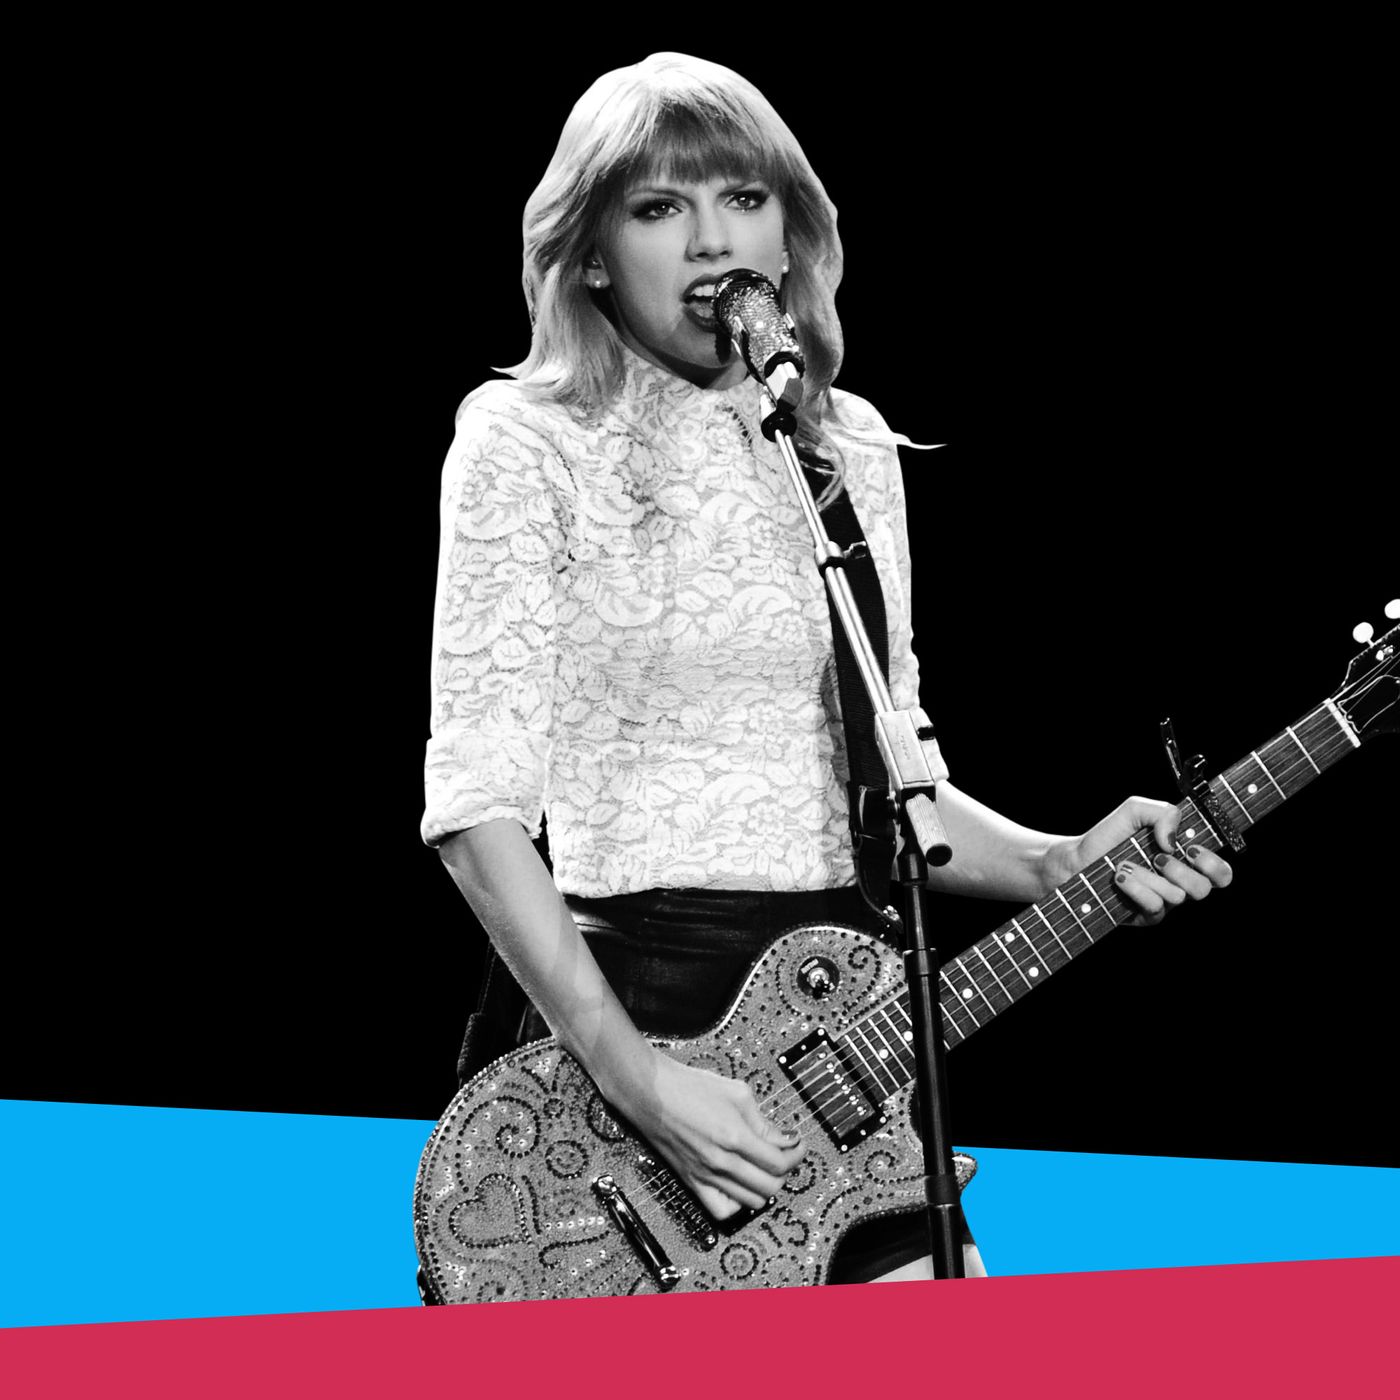 Read how Taylor Swift is (and has been) Empowering Young Women and